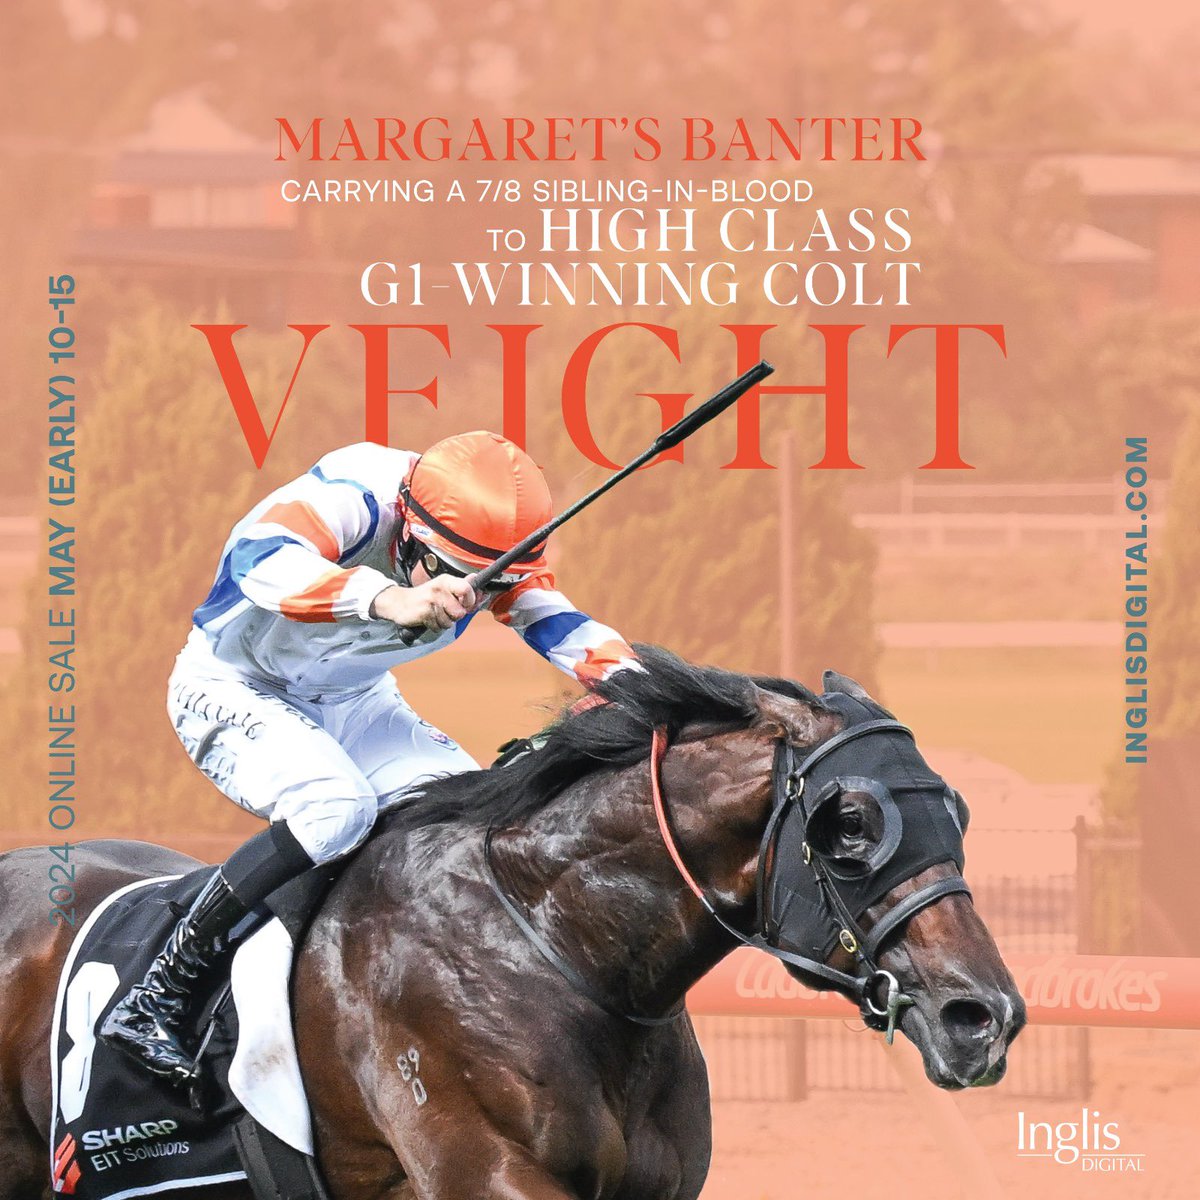 Carrying a 7/8 sibling-in-blood to high class G1-winning colt Veight, MARGARET’S BANTER is sure to have plenty of eyes on her in the current #InglisDigital sale. View the listing here: bit.ly/3WDlE18